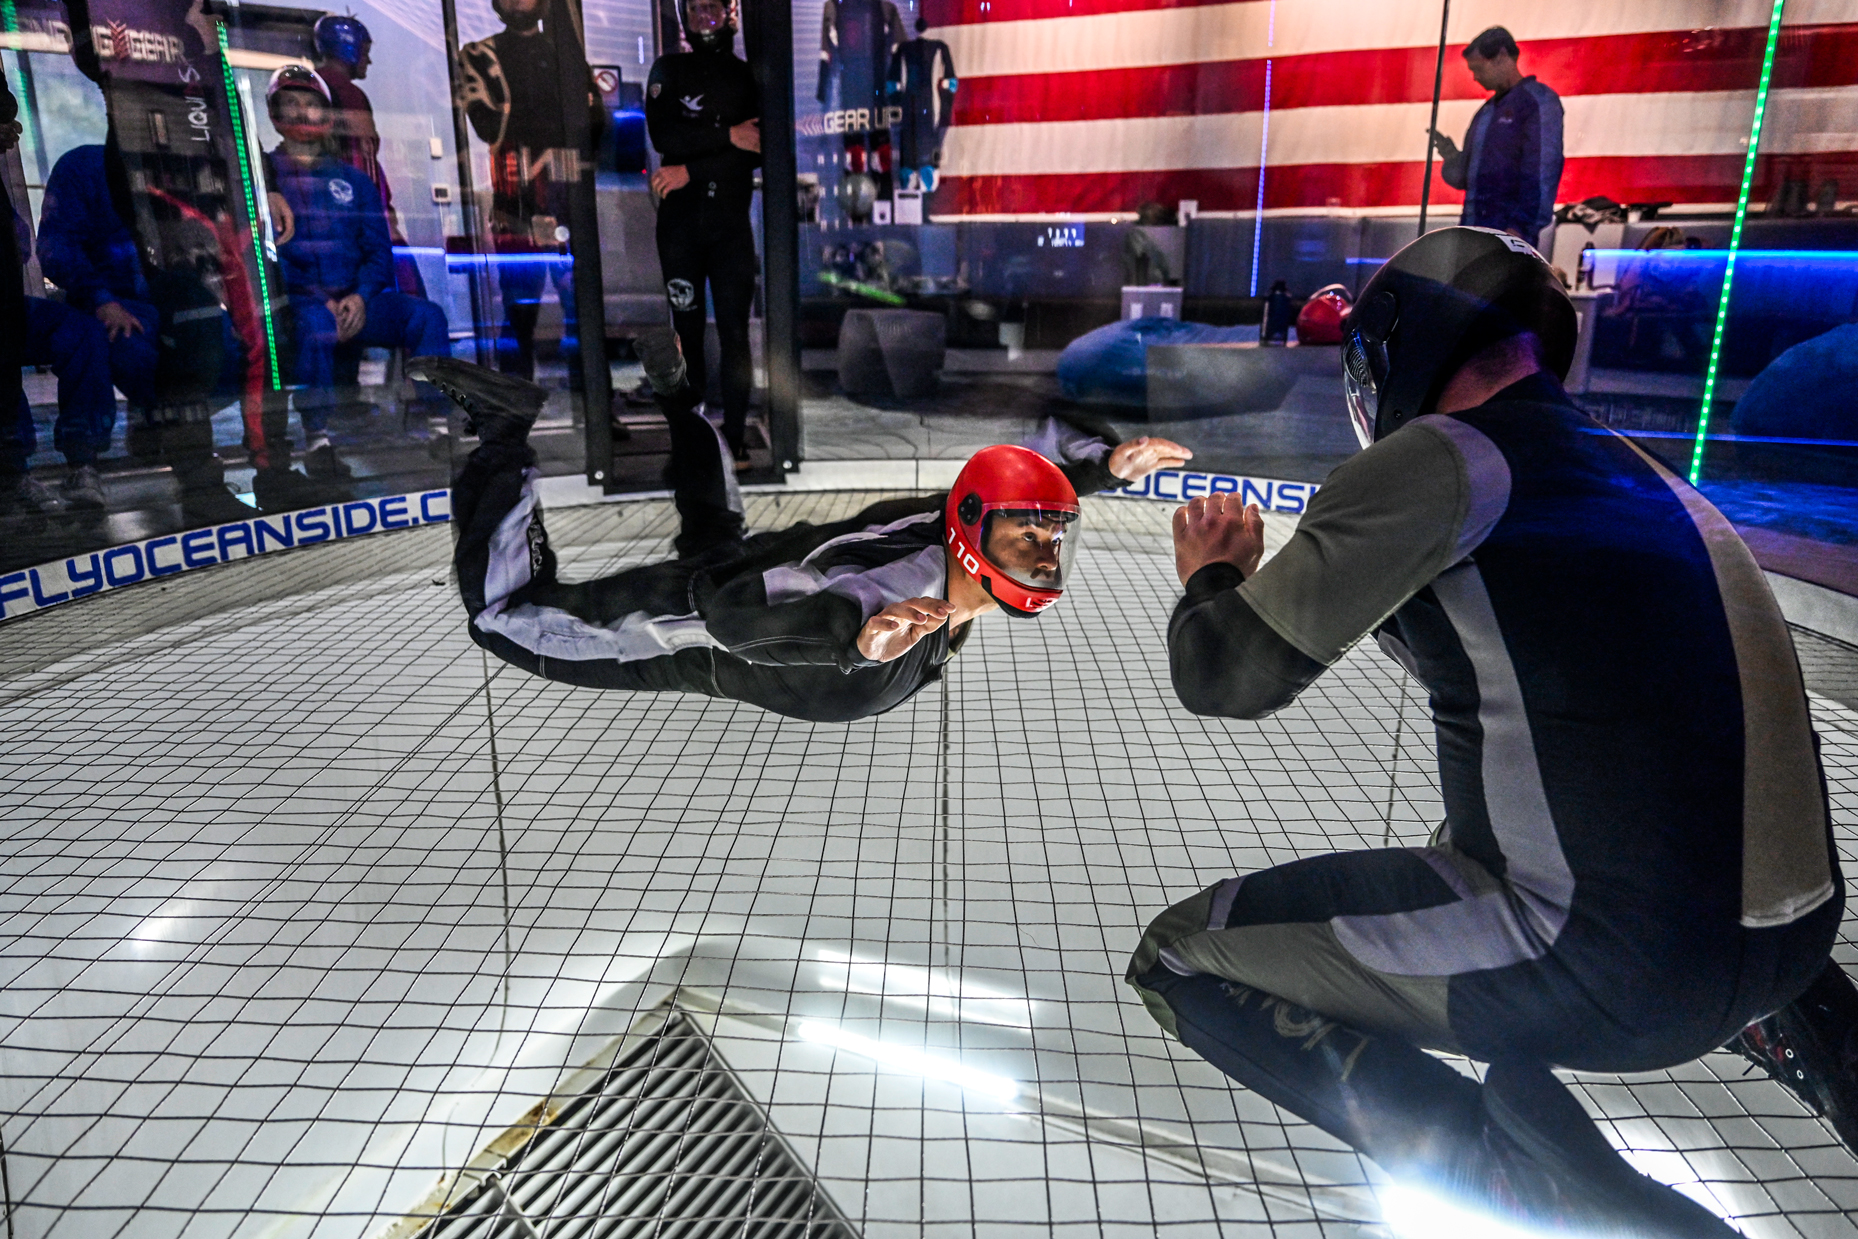 Sailors assigned to West-coast explosive ordnance disposal (EOD) units practice body control techniques in a wind tunnel in preparation for military free fall operations.